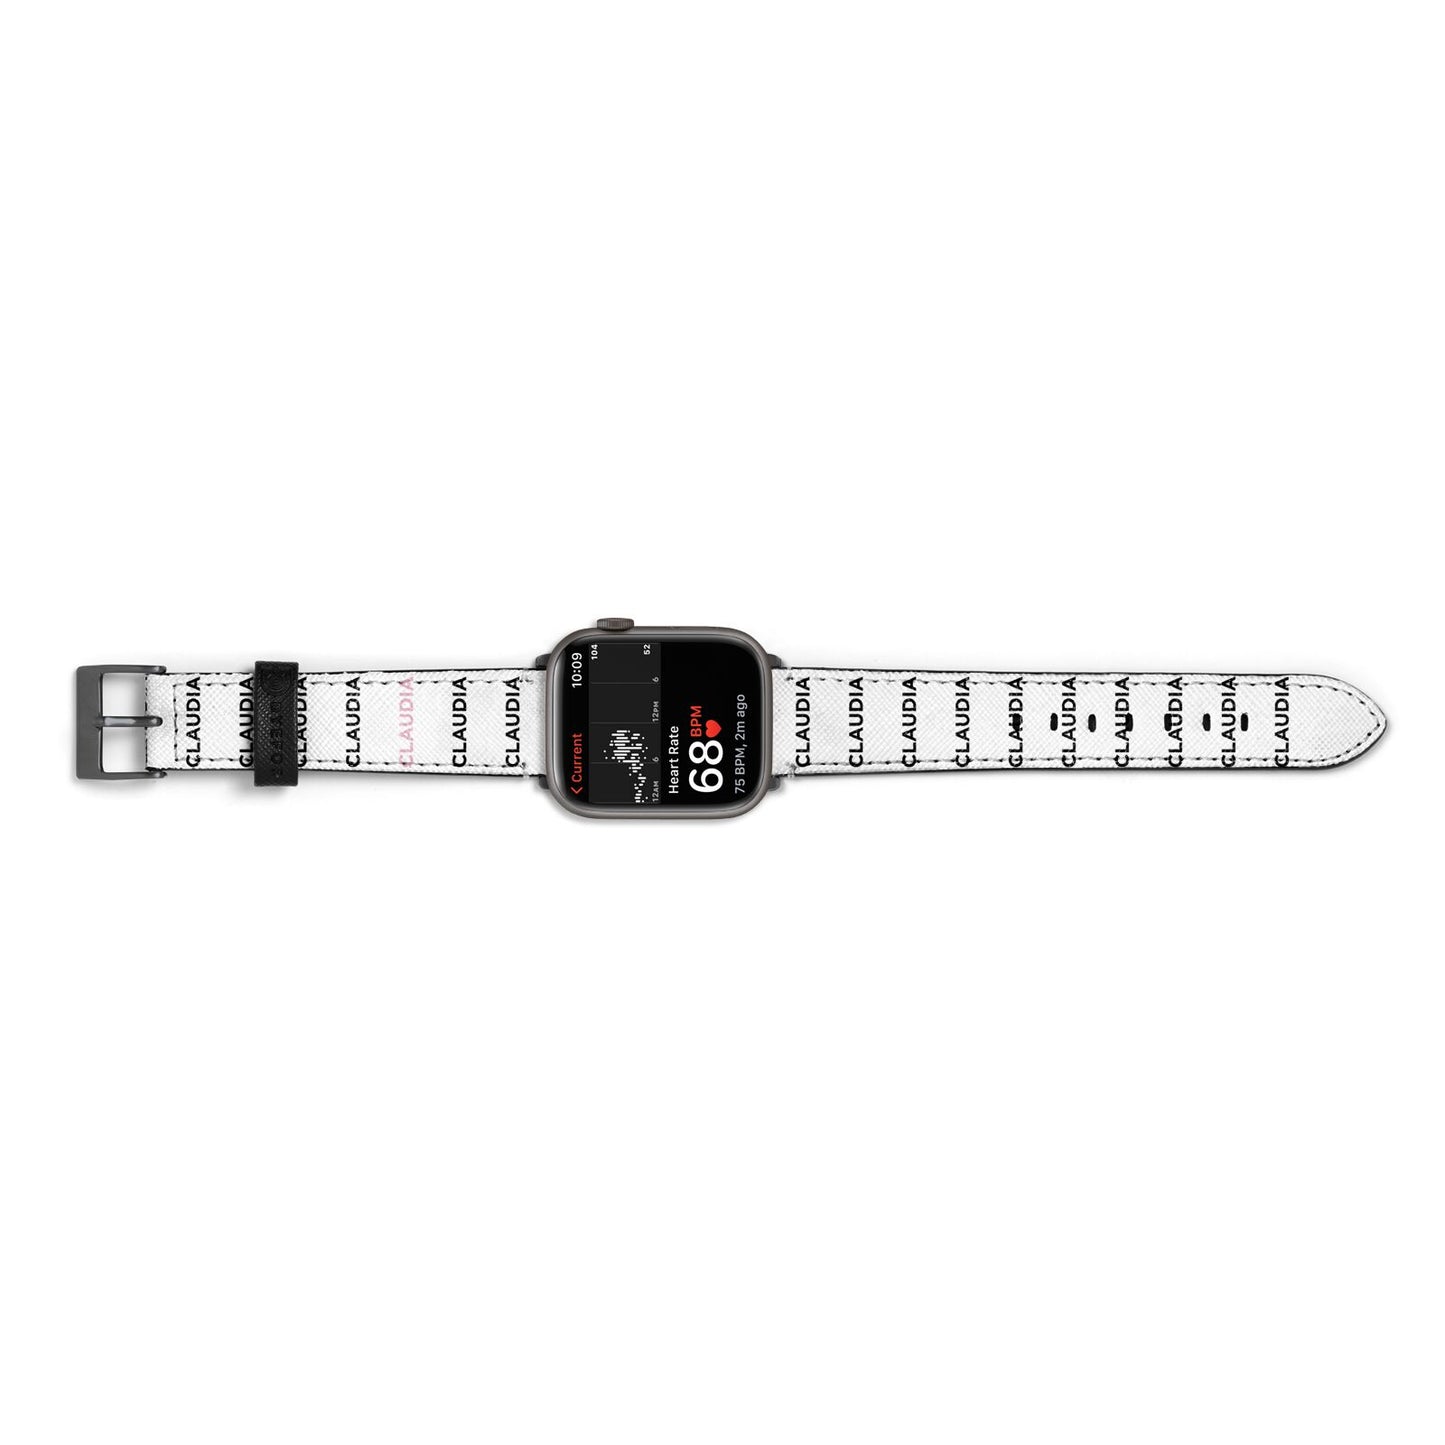 Custom Name Repeat Apple Watch Strap Size 38mm Landscape Image Space Grey Hardware